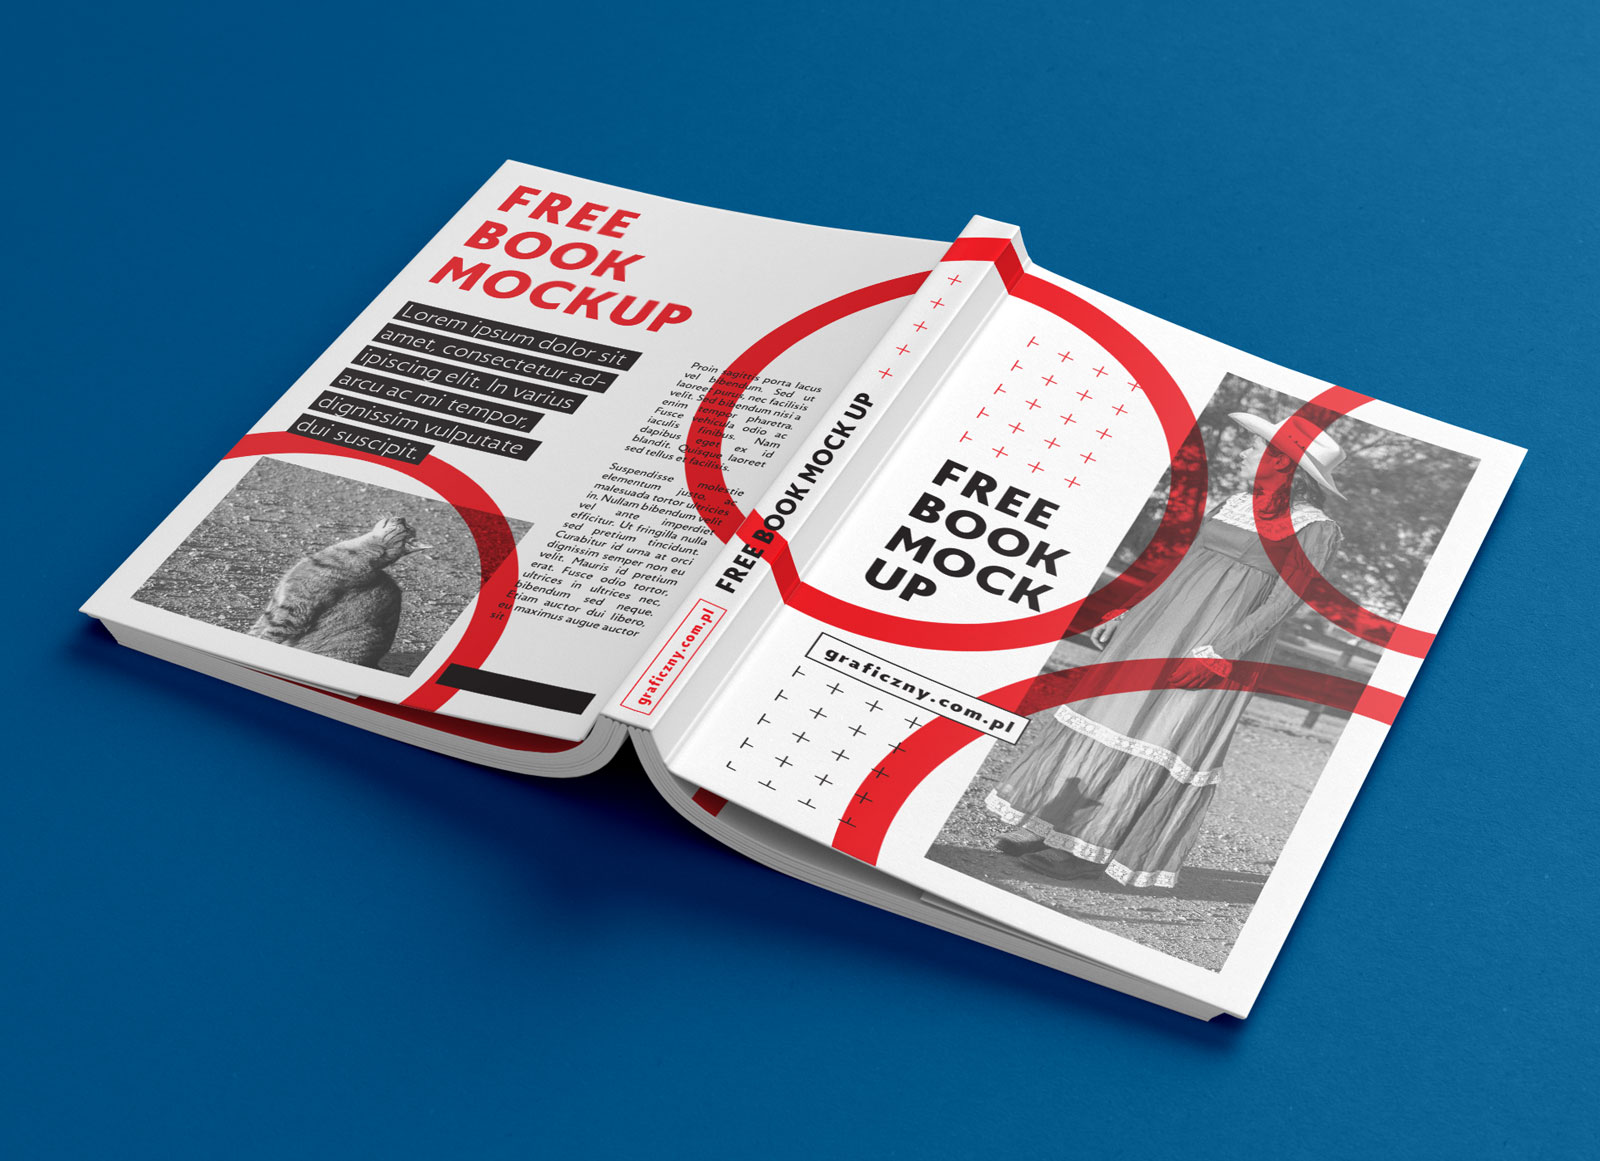 Download Free A4 Paperback Book Title & Inner Pages Mockup PSD - Good Mockups